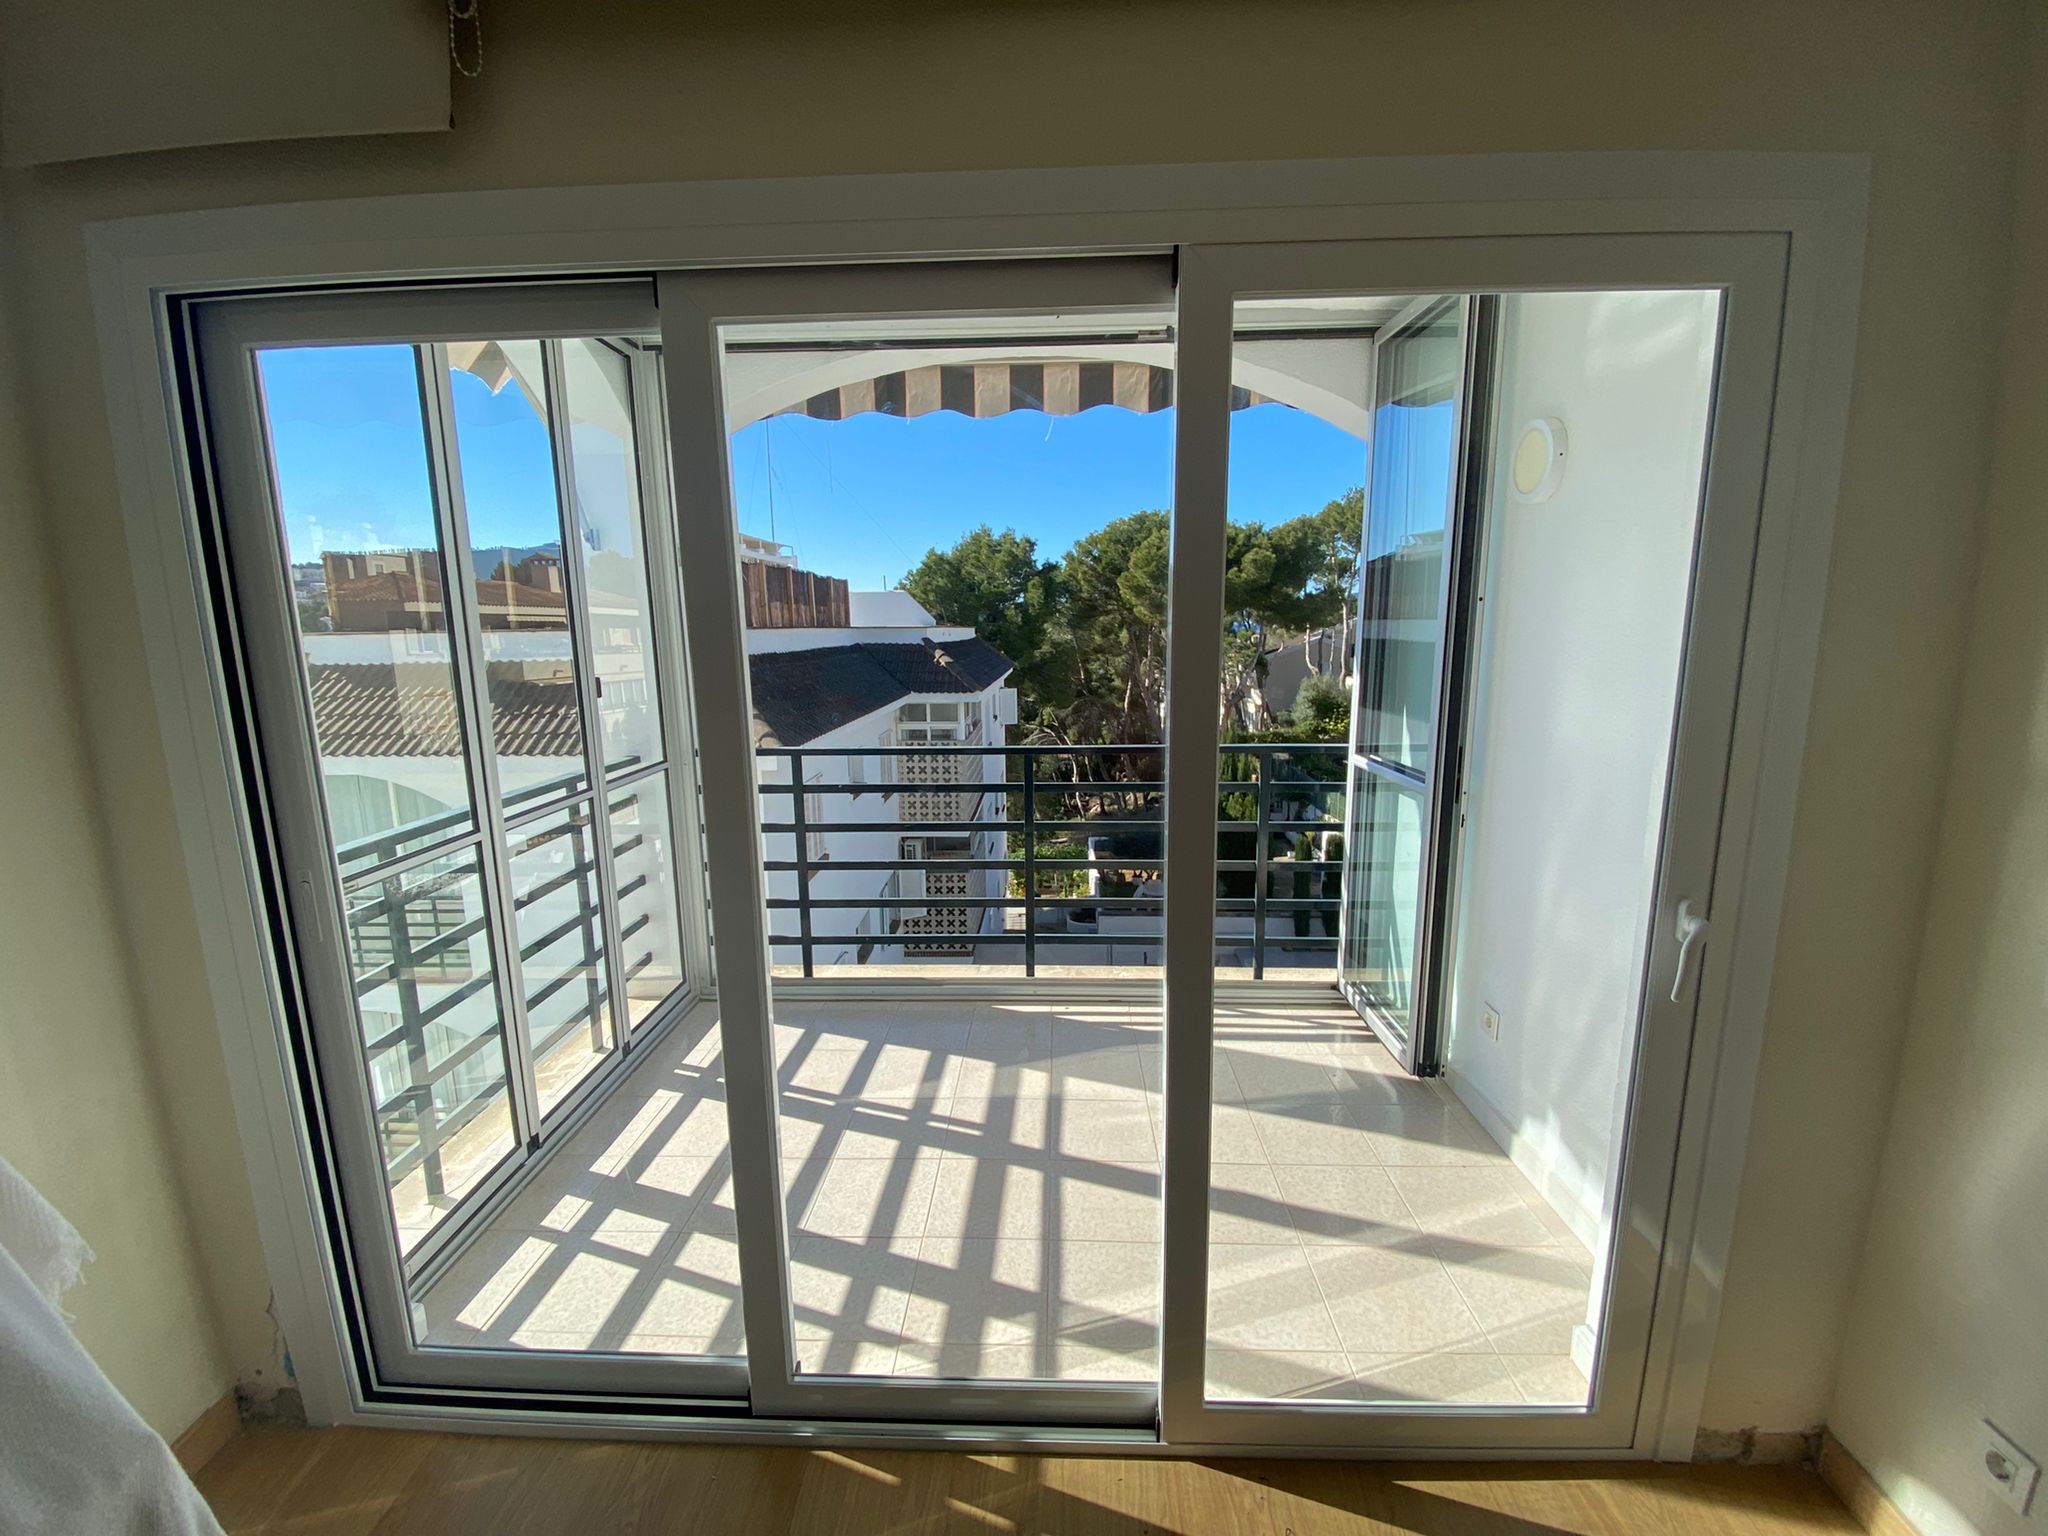 Aluminum or PVC windows in Mallorca, which one to choose??